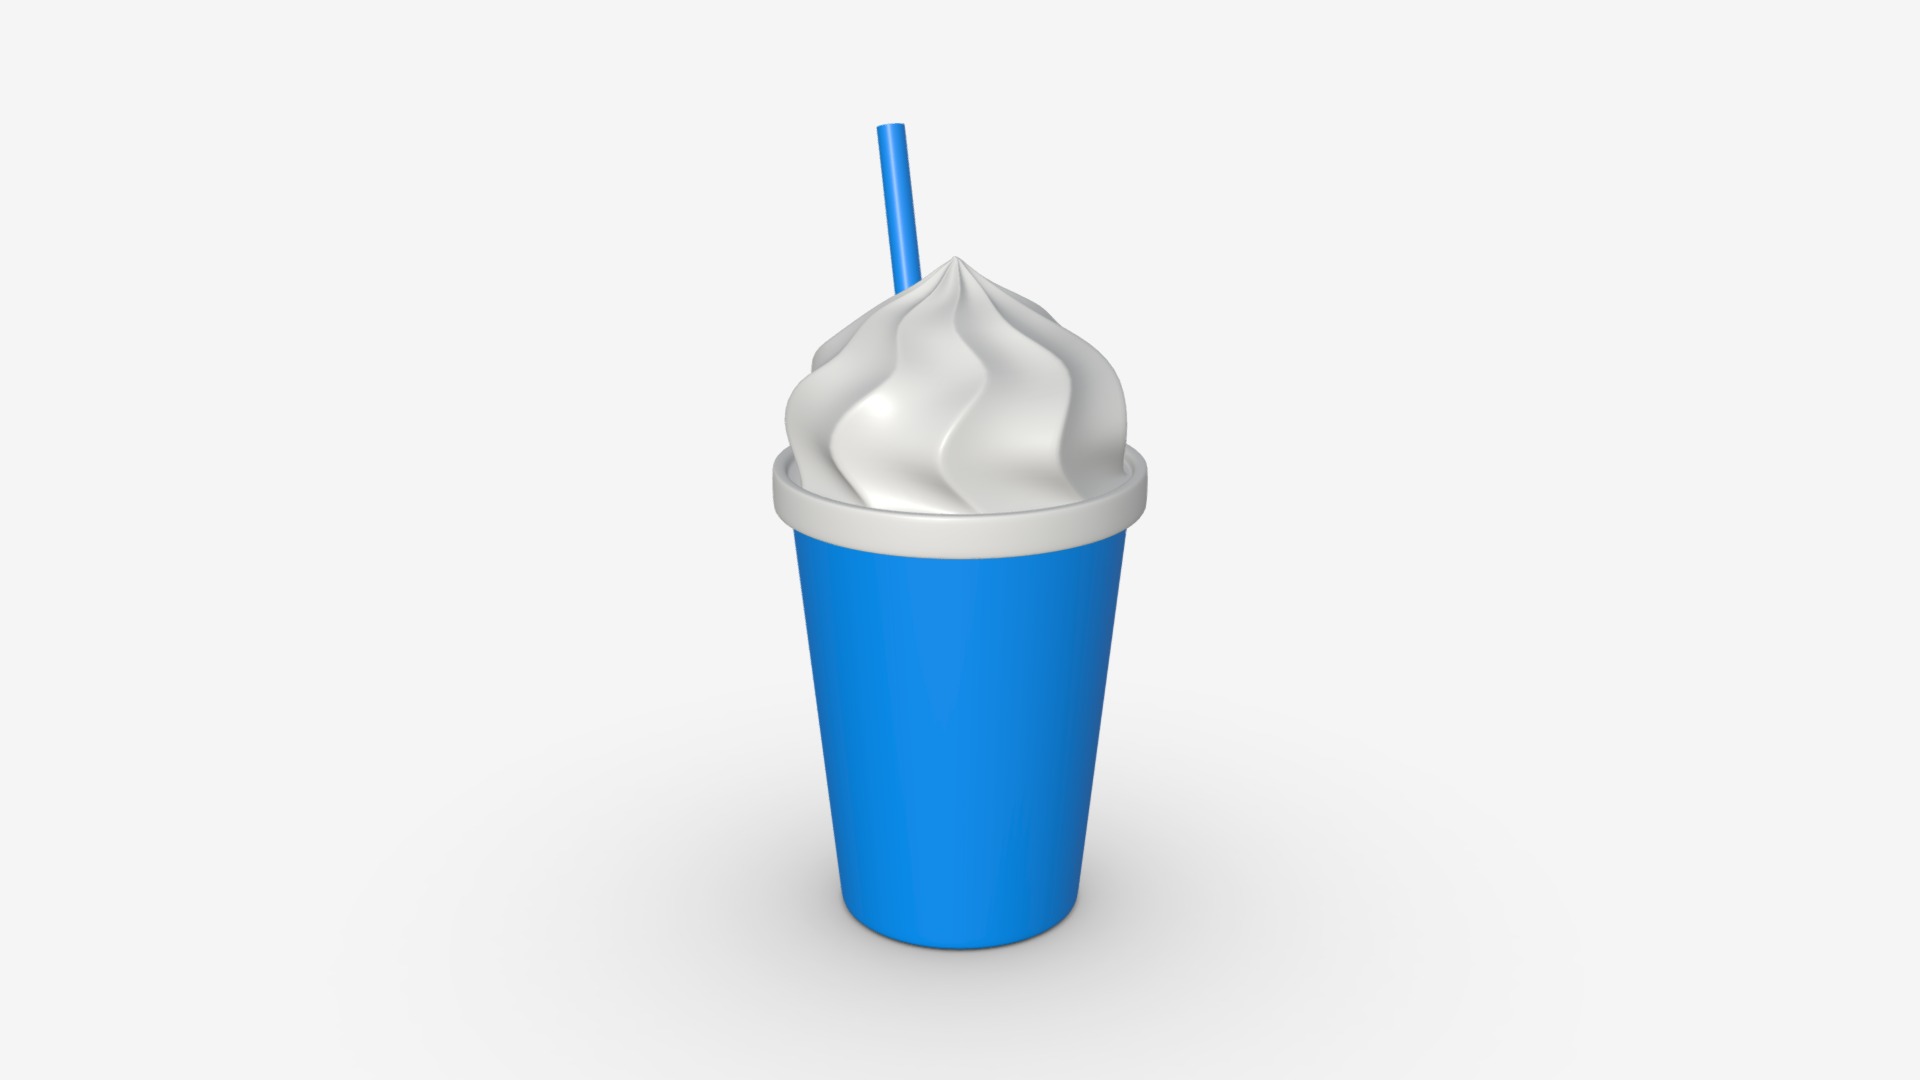 3D model plastic cup - This is a 3D model of the plastic cup. The 3D model is about a blue plastic container with a blue lid.